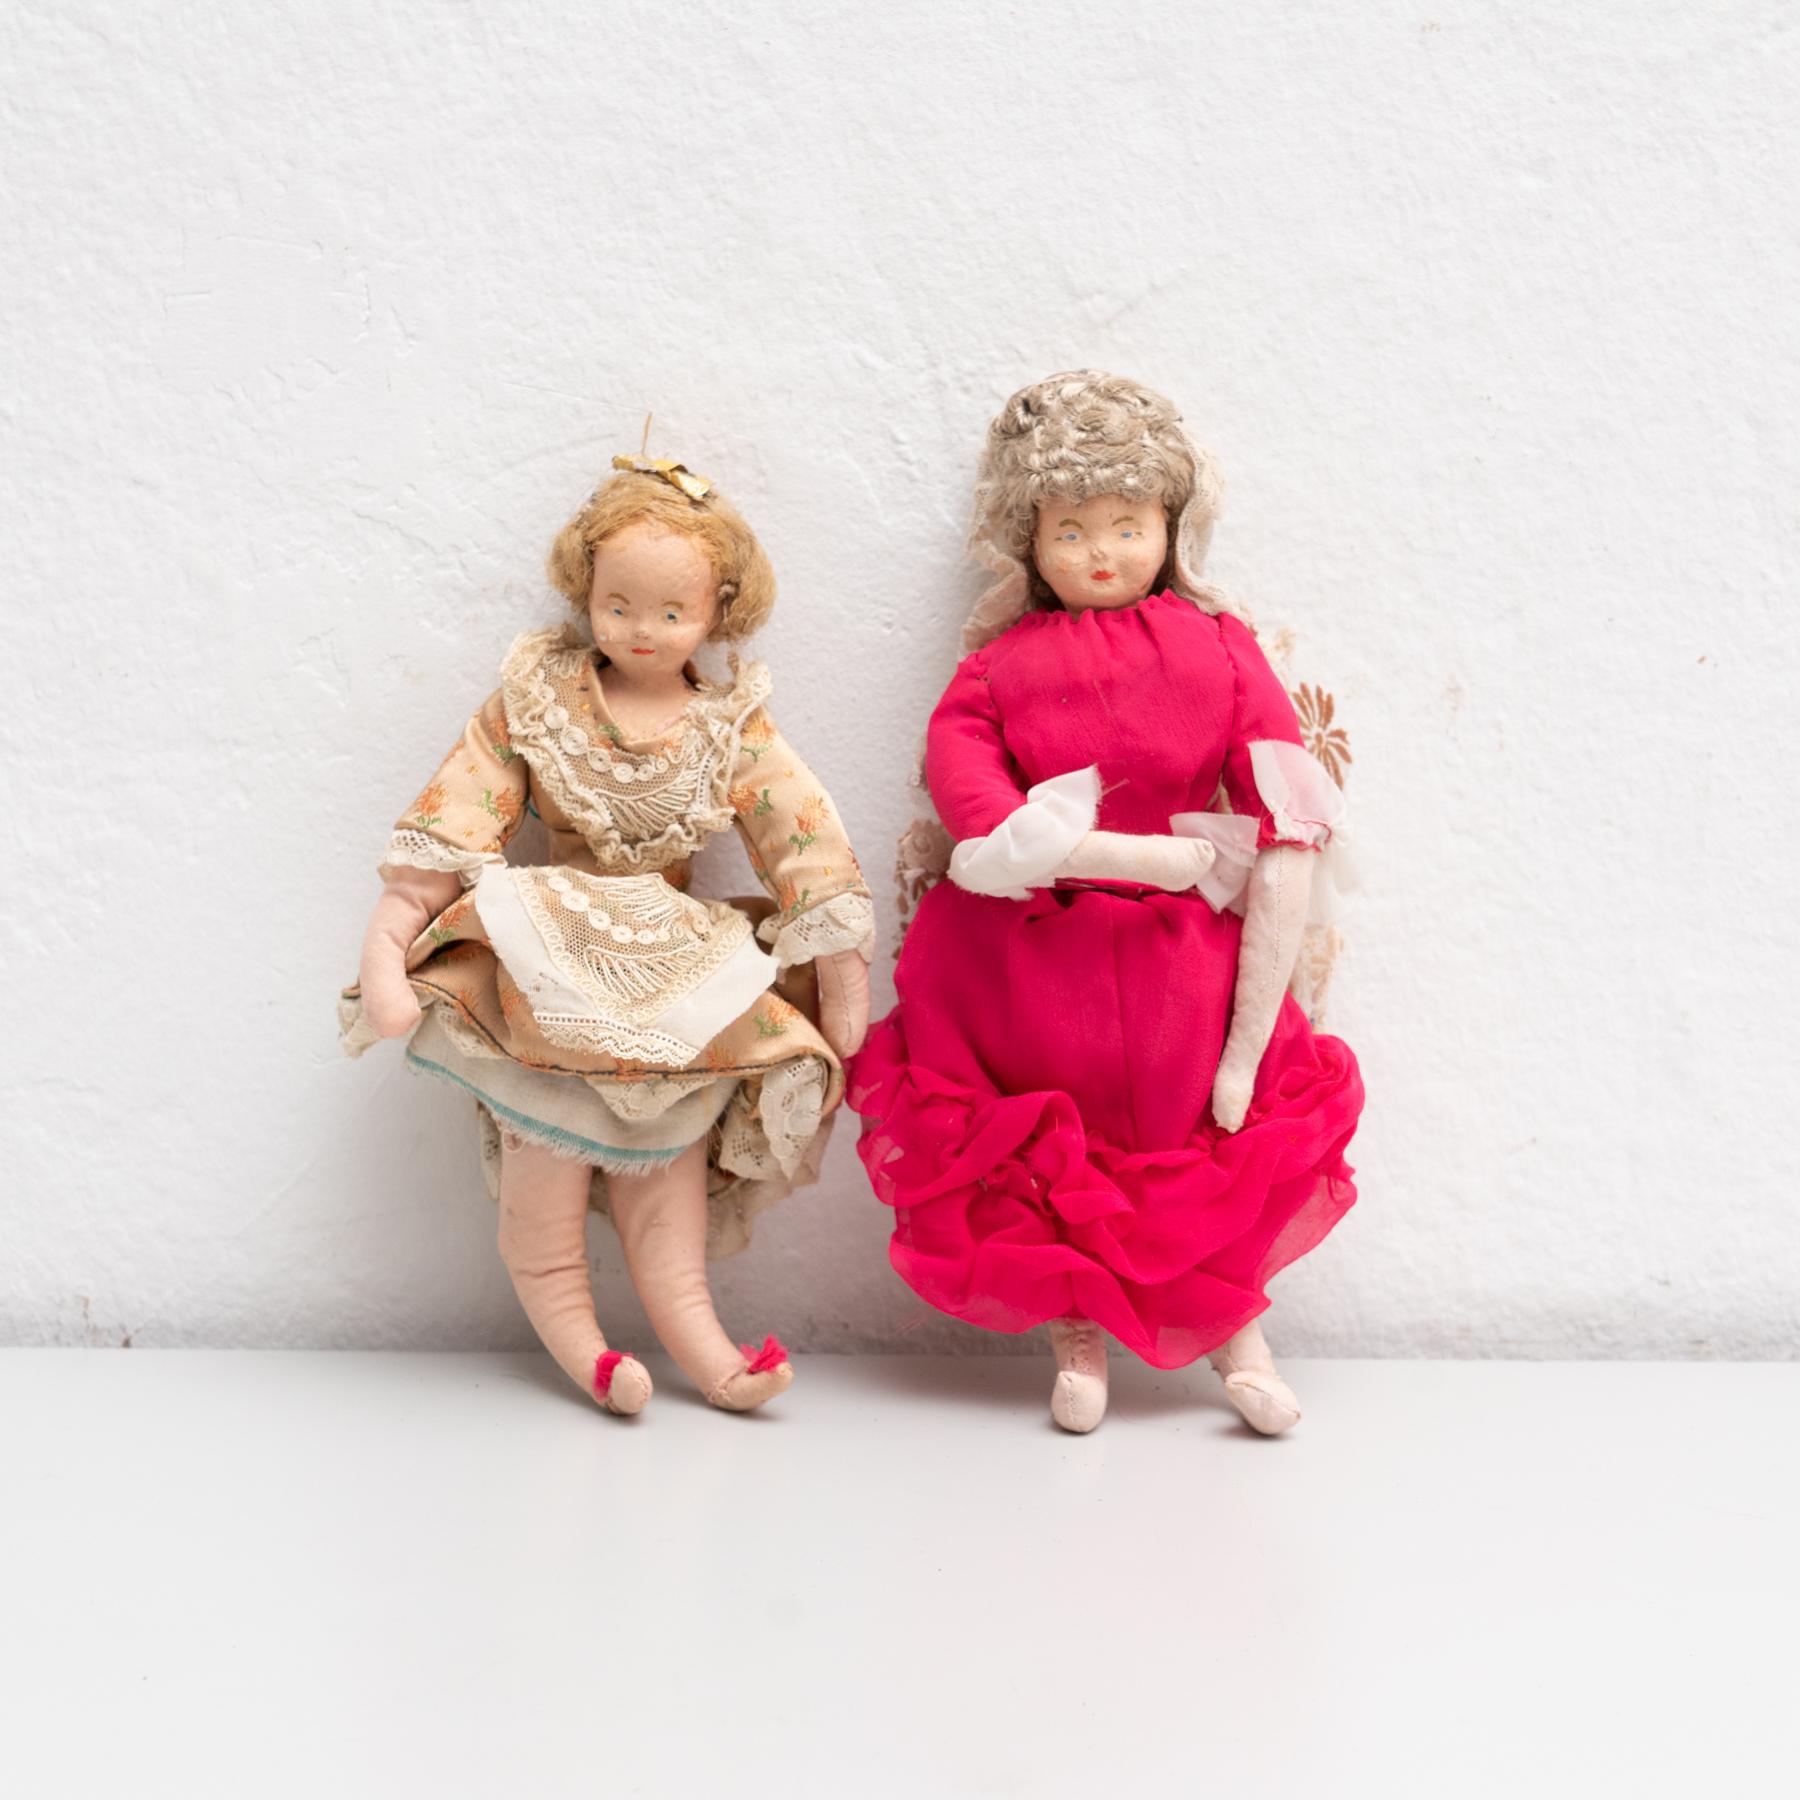 Antique early 20th century hand painted rag doll of two women dressed with traditional costumes. 

Manufactured circa 1920 in Spain.

In original condition, with minor wear consistent with age and use, preserving a beautiful